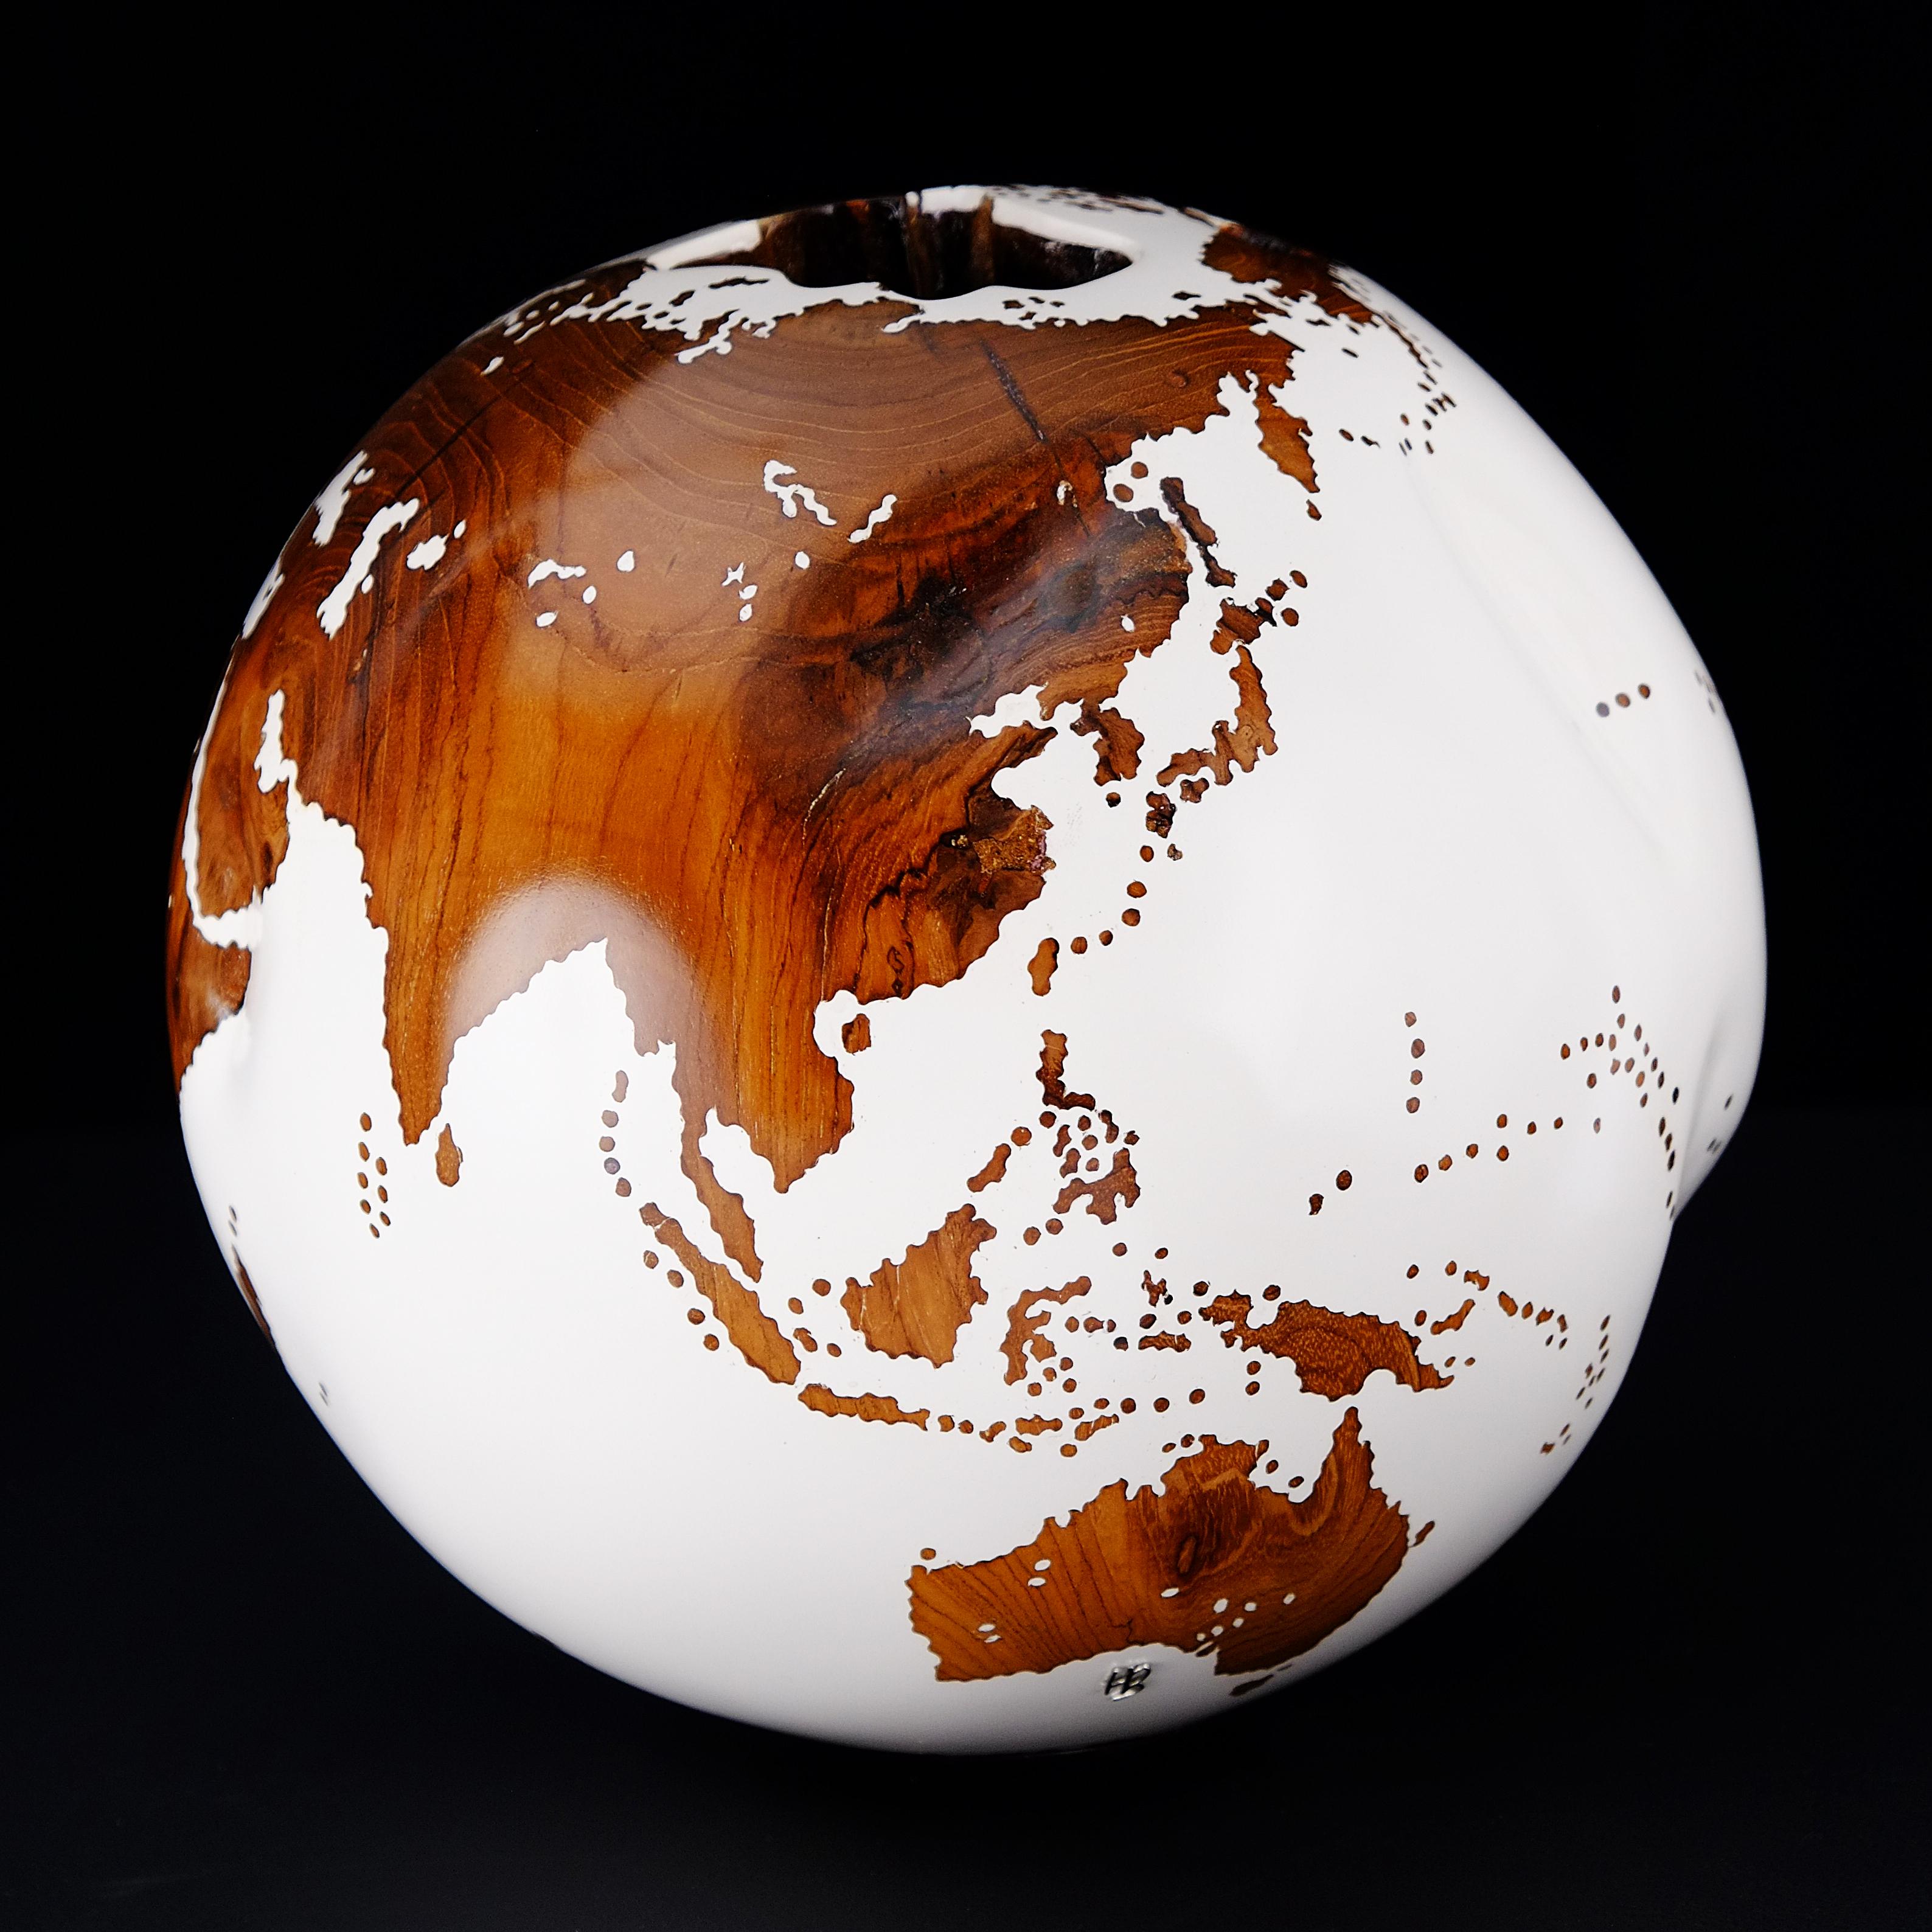 Teakwood and white make this beautiful turning globe a real stunning sculpture.
Made from a whole piece of wood the way the sculpture is shaped is defined by how the tree grew.
Sitting on a turning base the sculpture can spin silently around, so